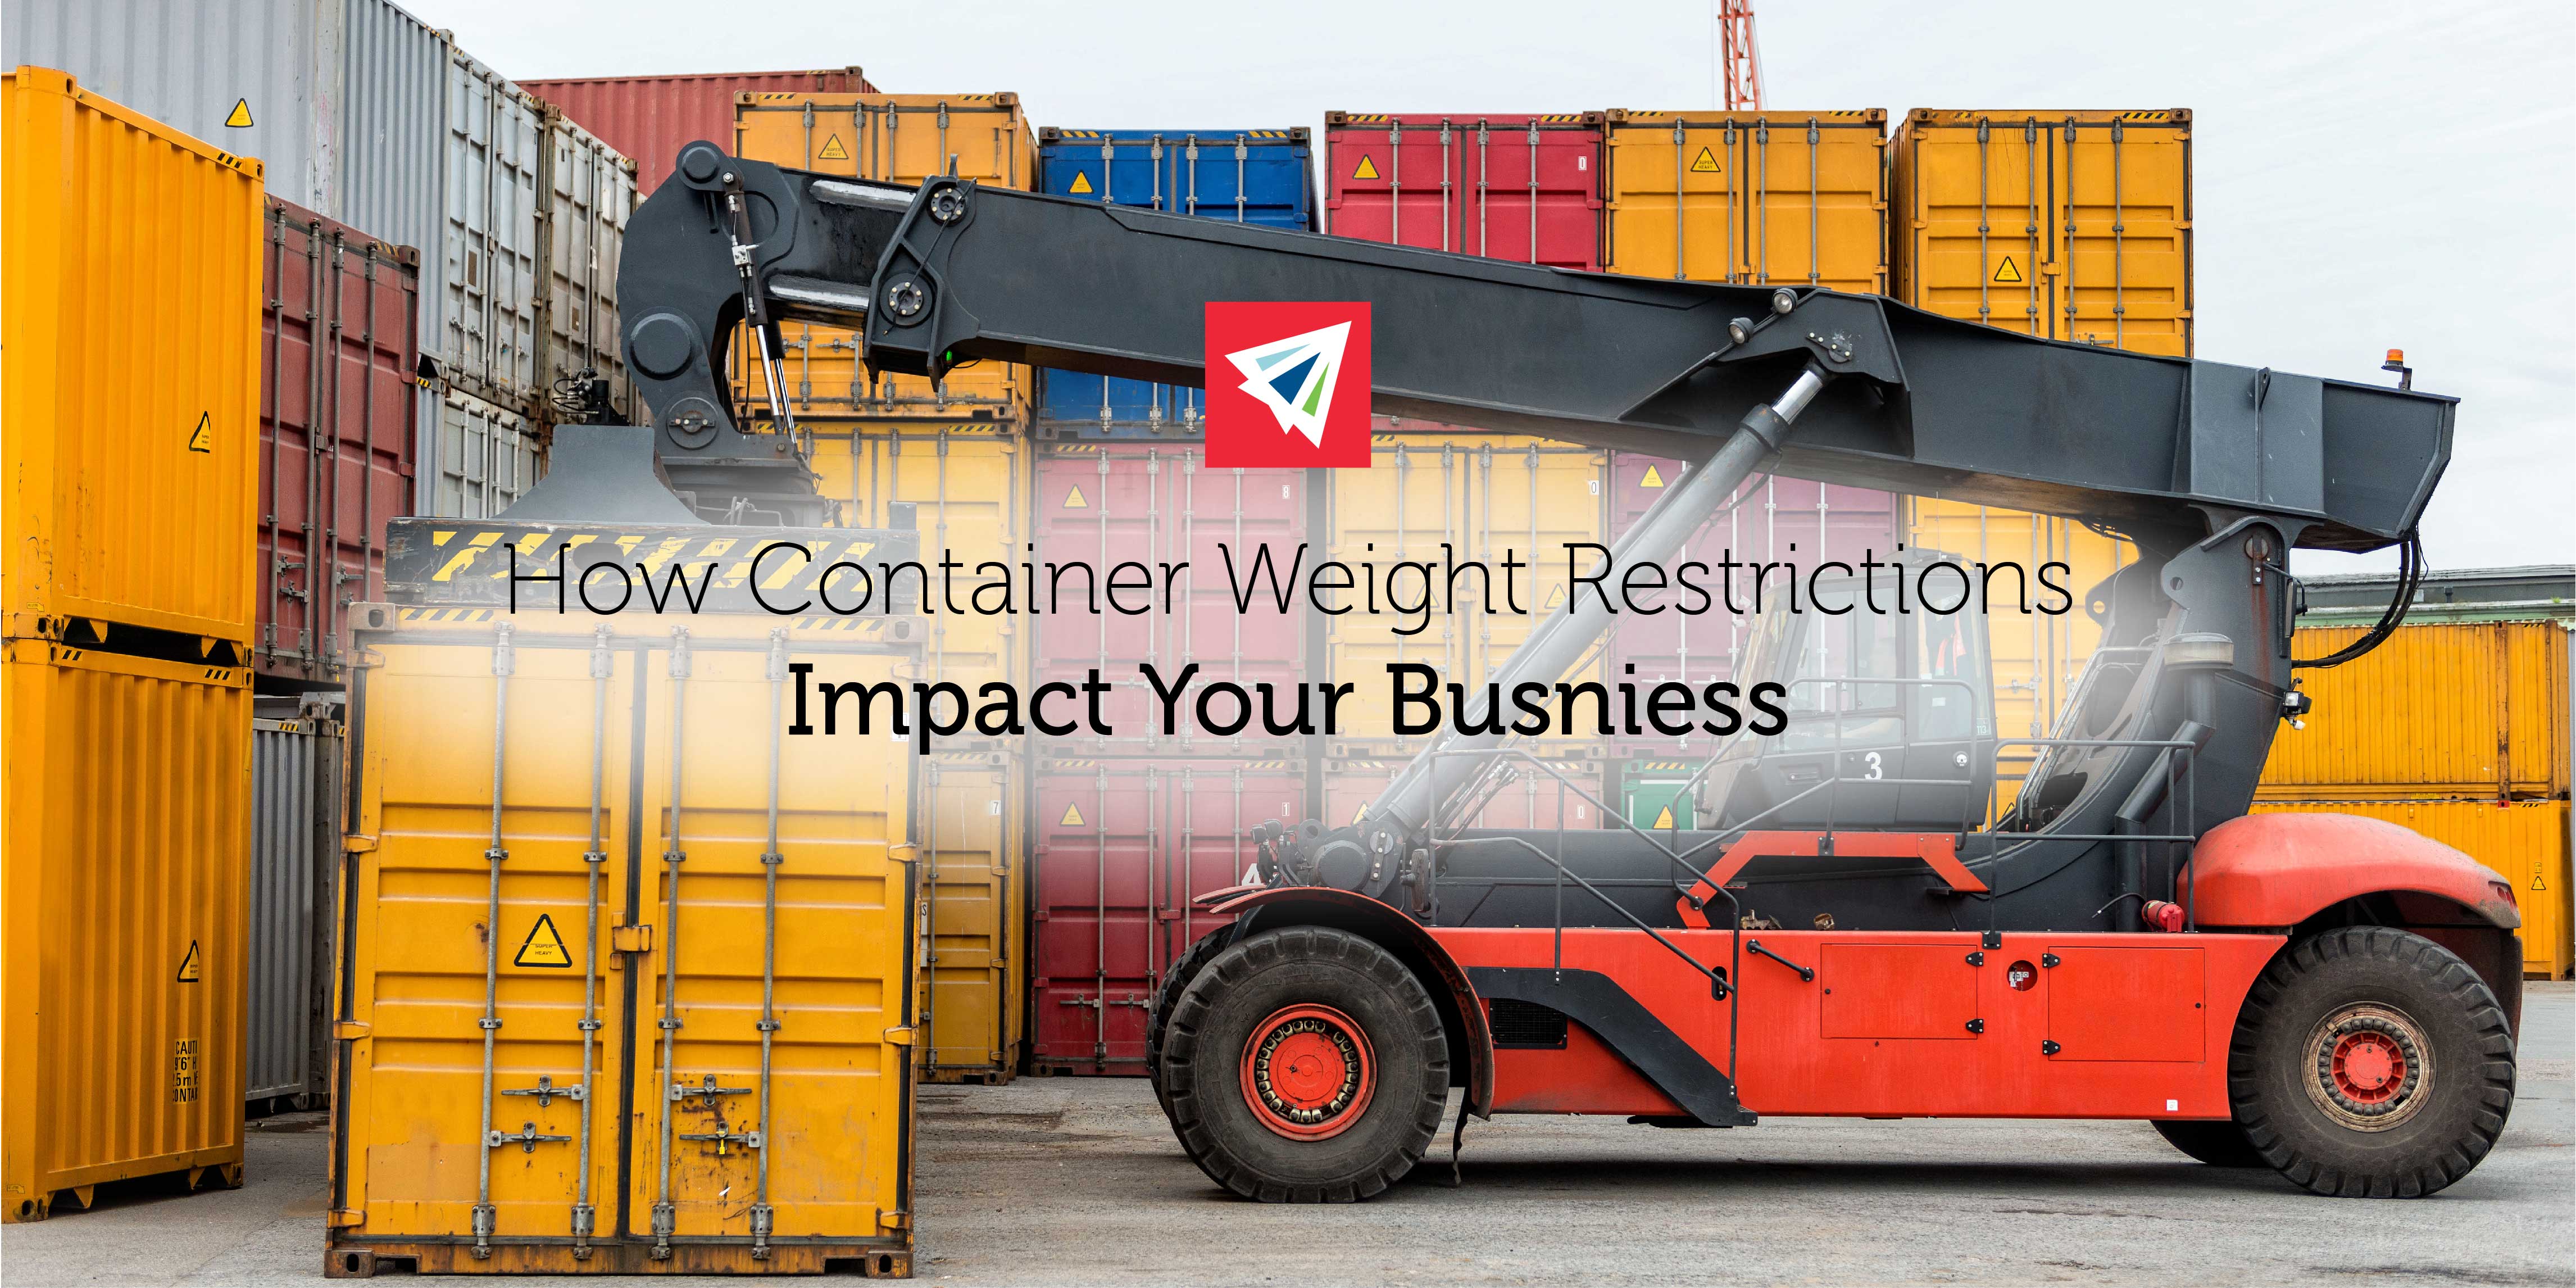 How Container Weight Restrictions Impact Your Business